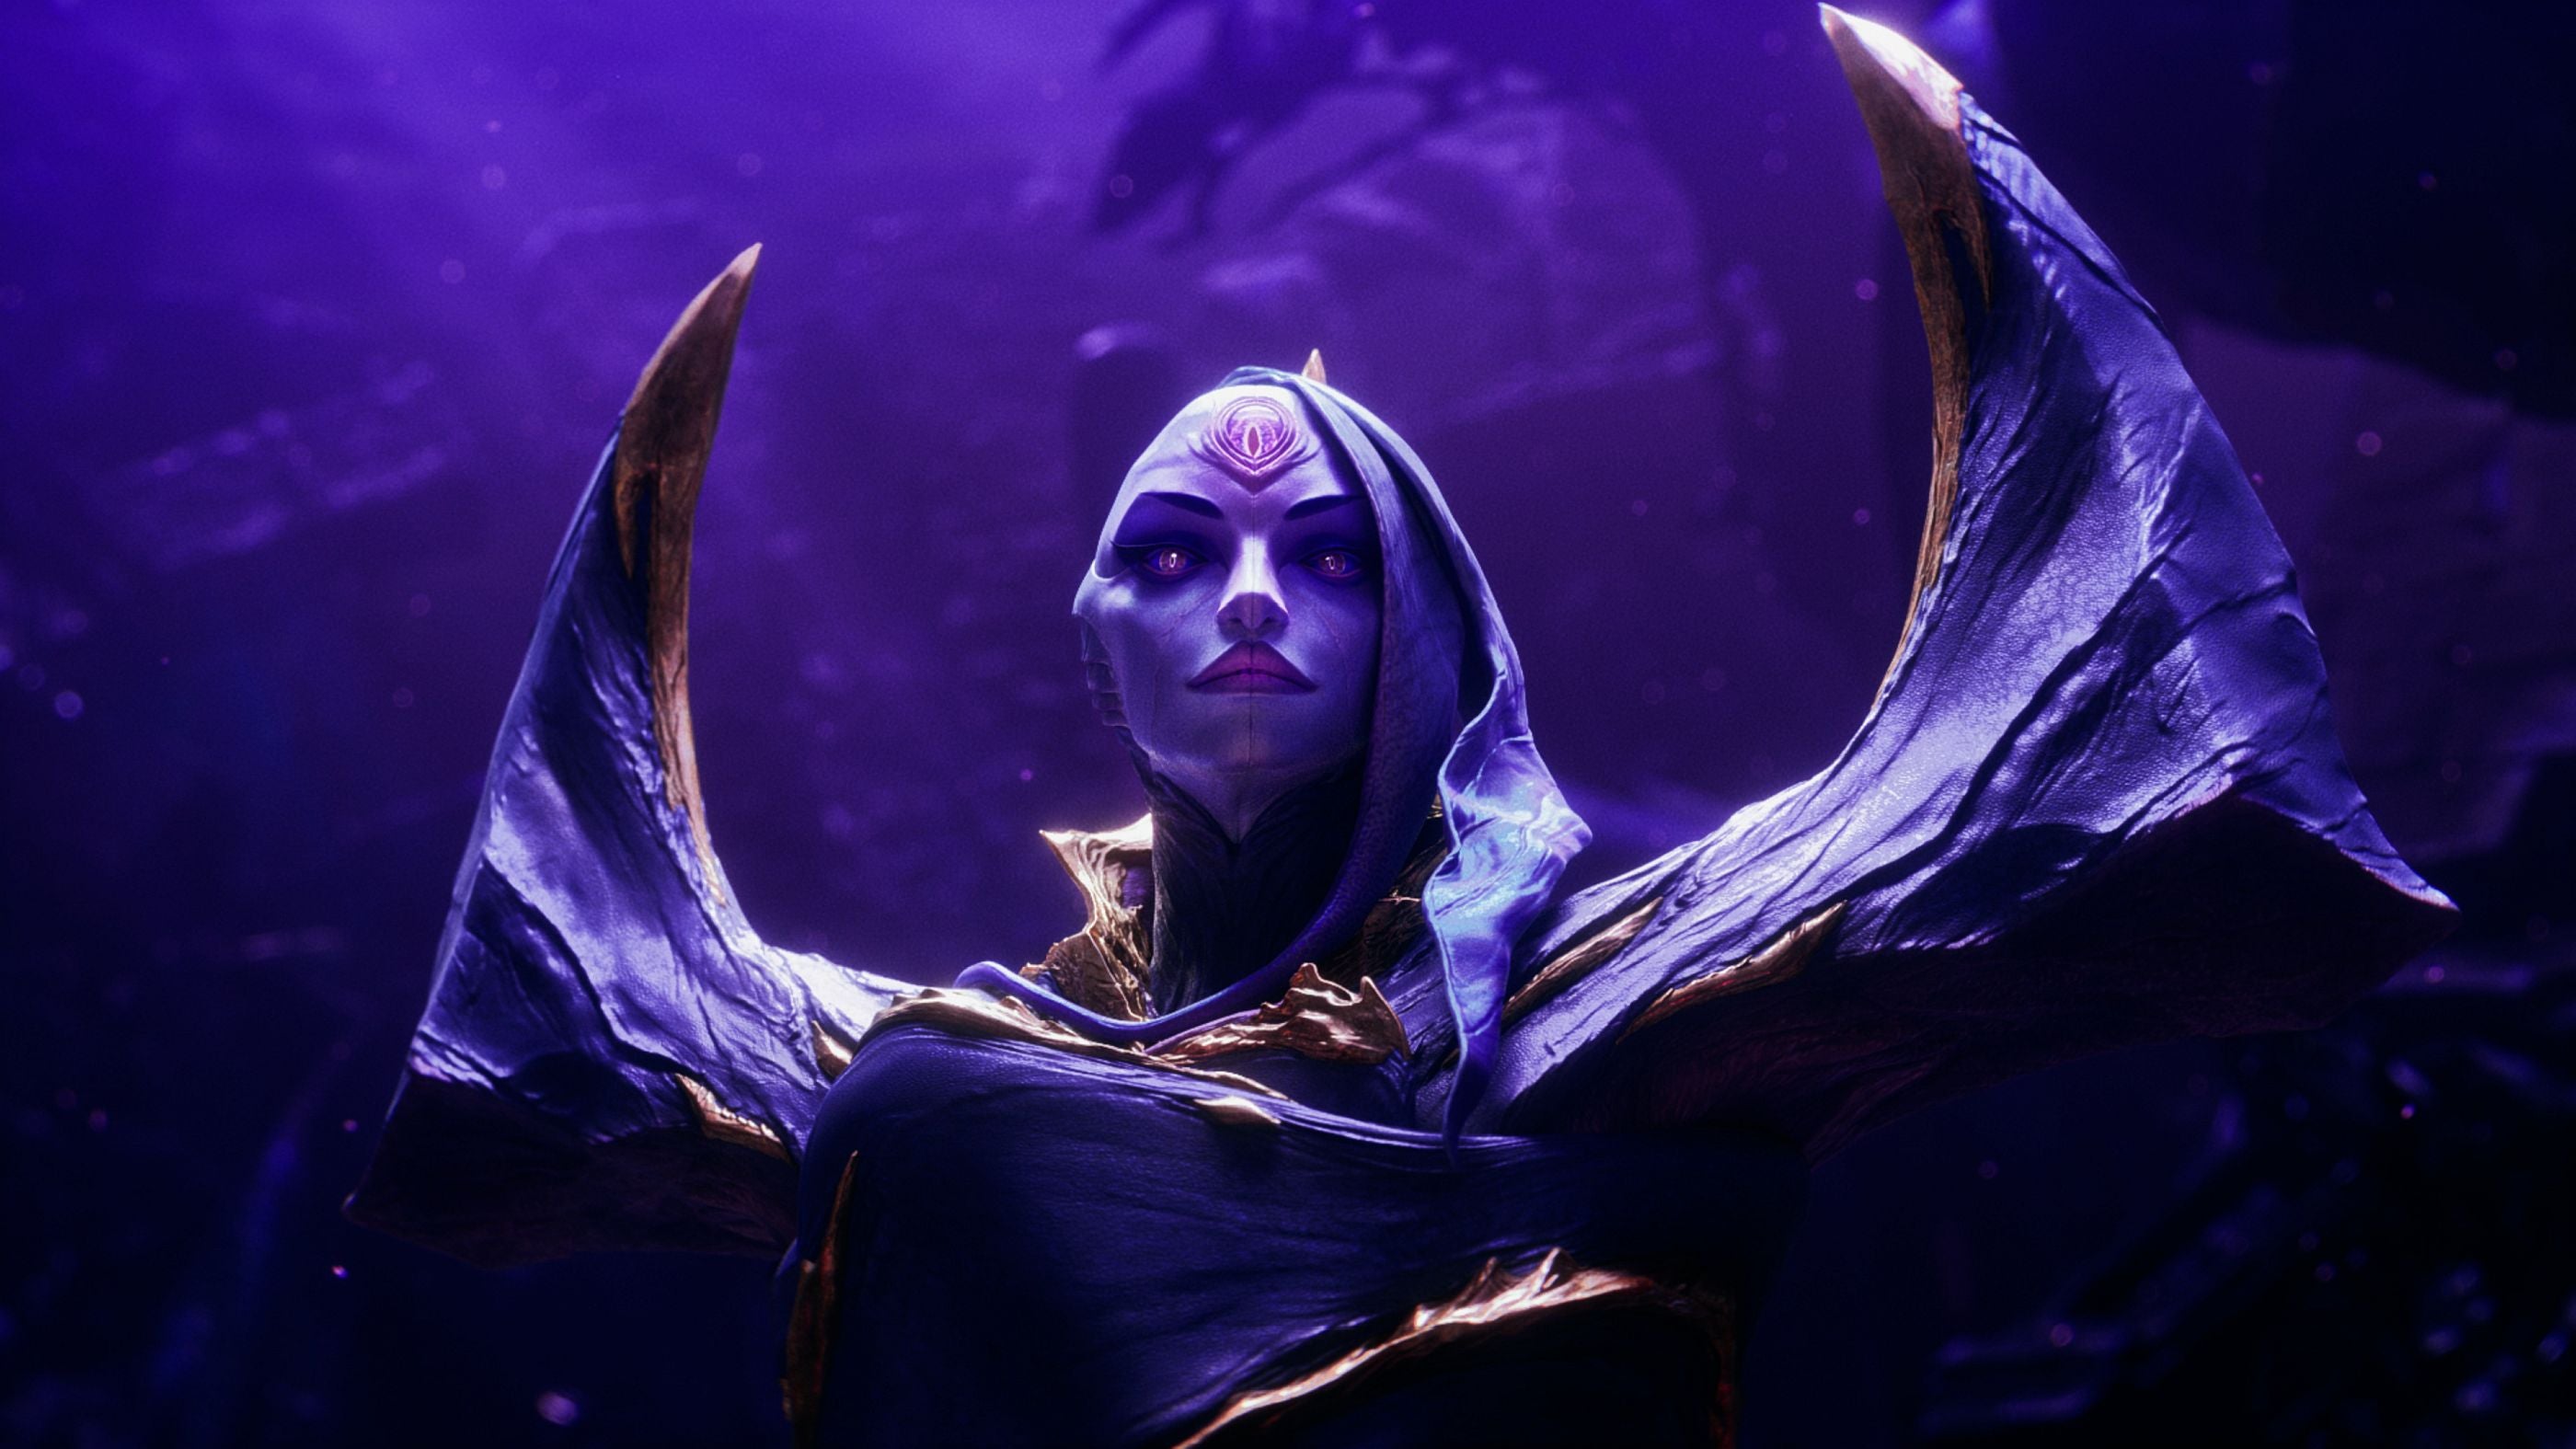 Image for Riot reveals new League of Legends Void champion, Bel'veth